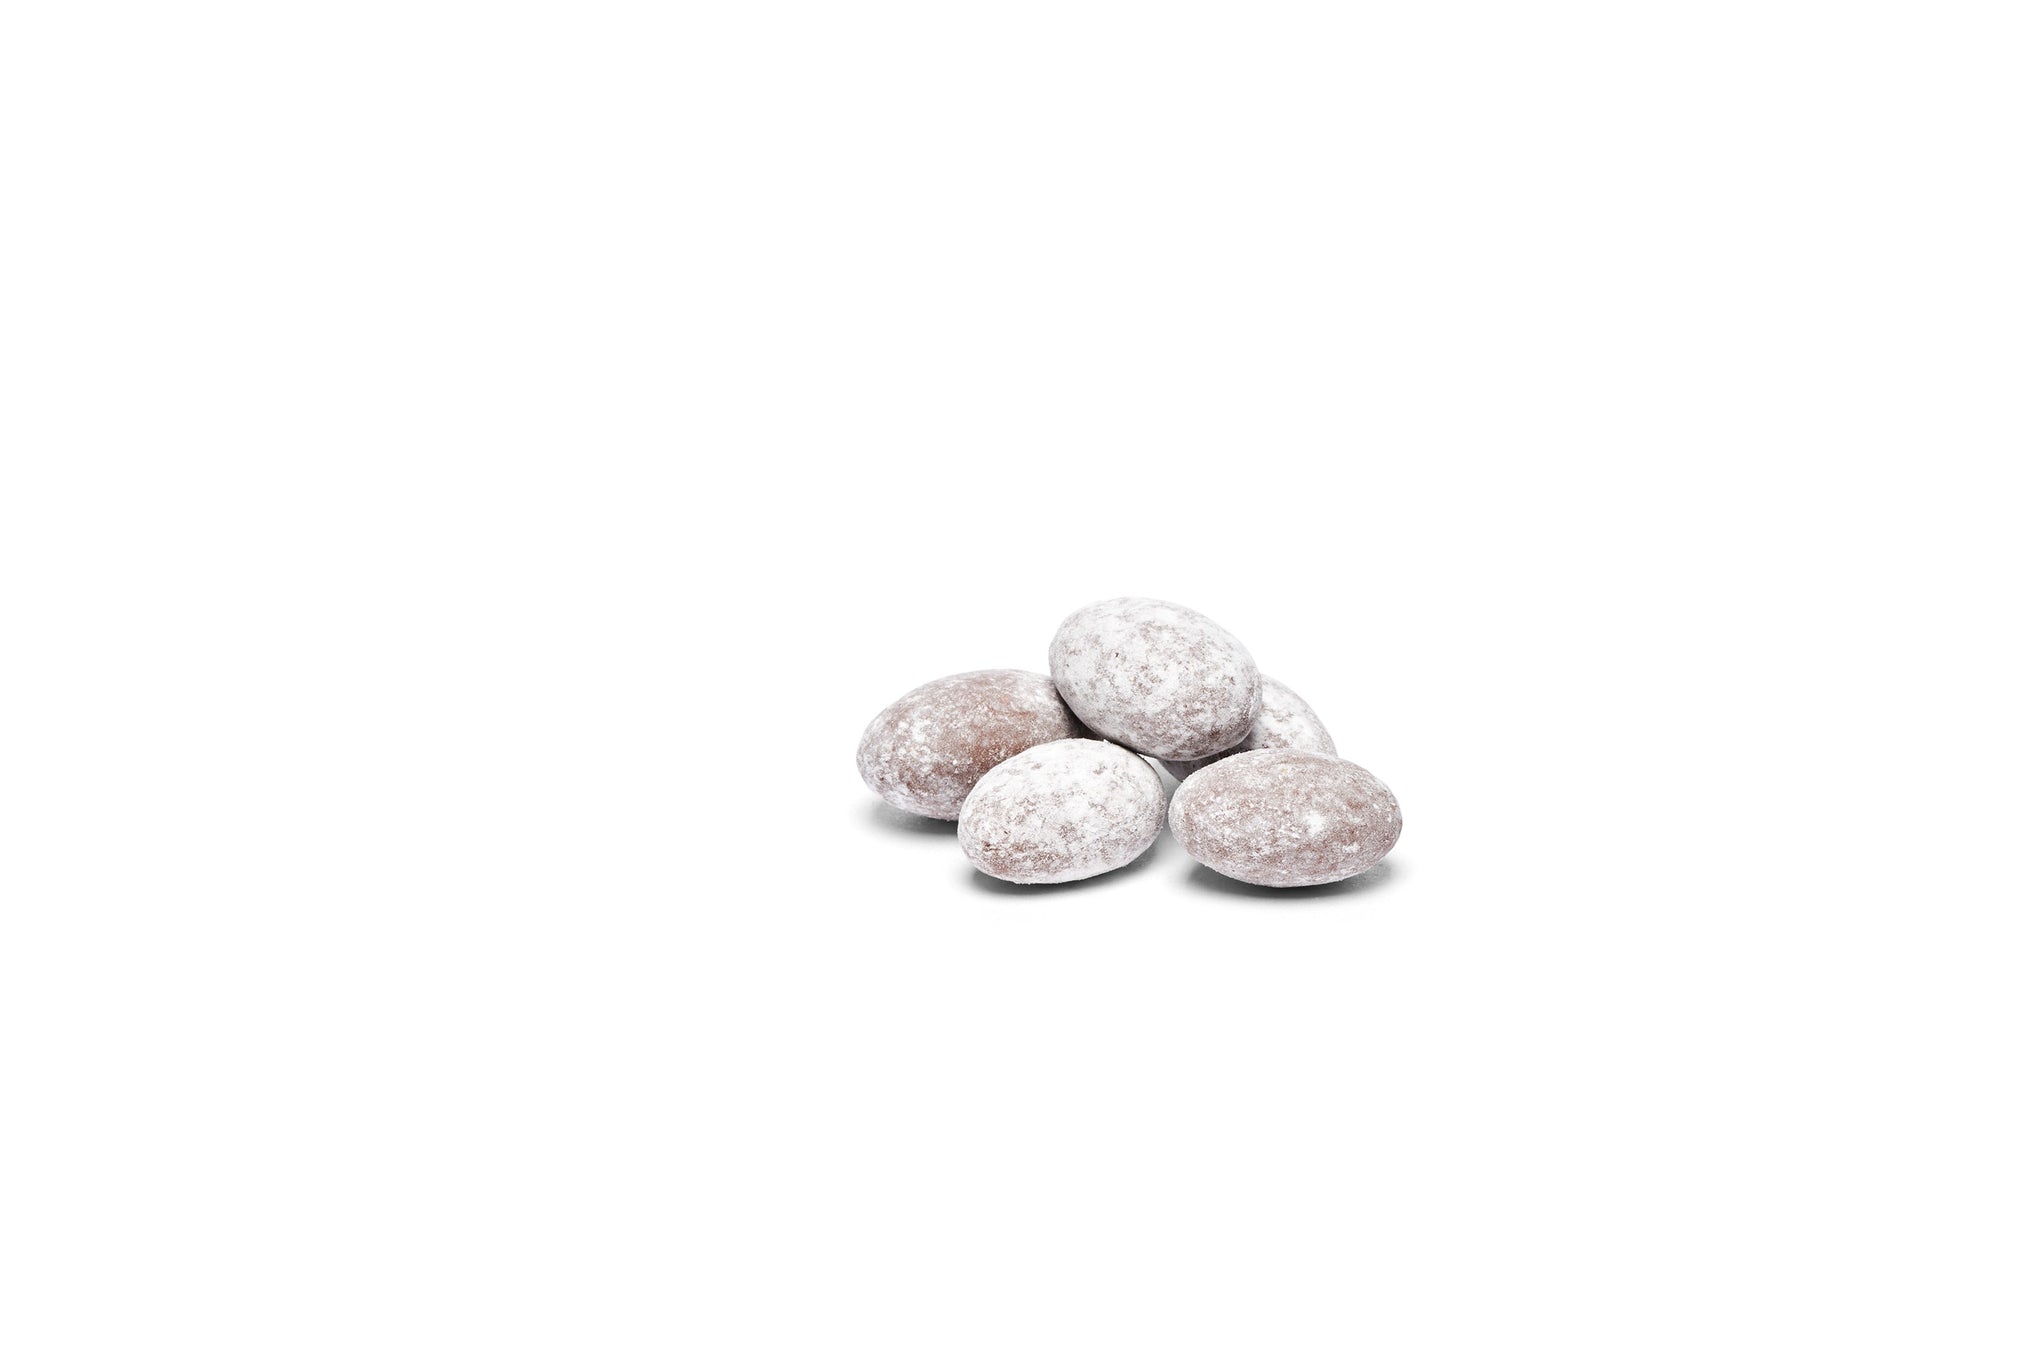 Dusted almonds stacked together